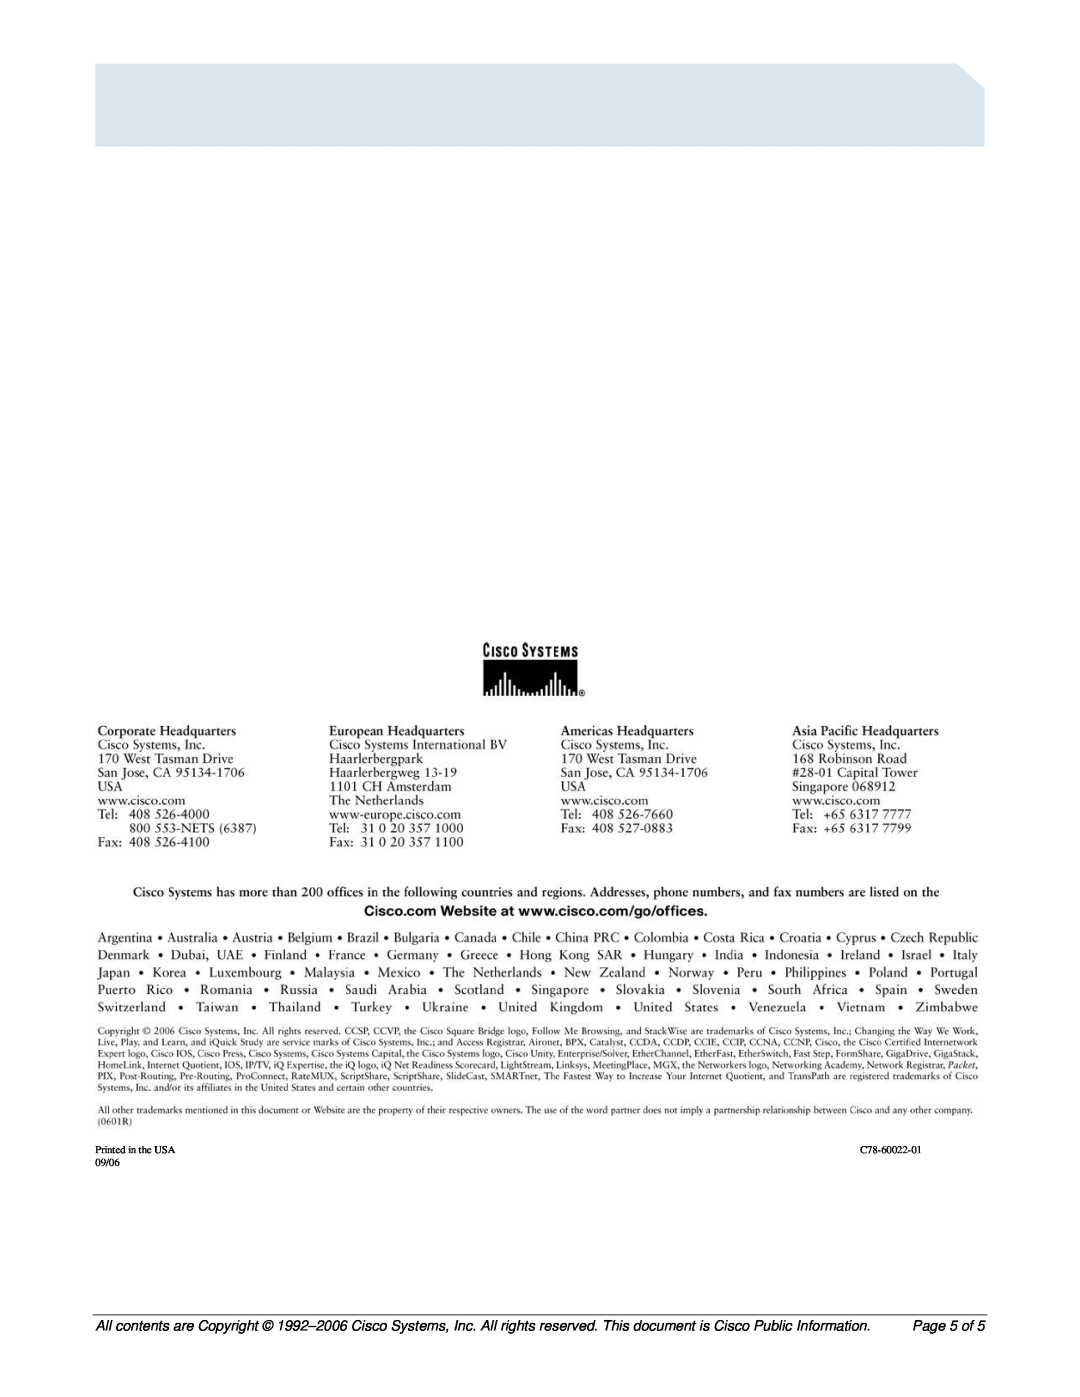 Cisco Systems 7500, 7300 manual Page 5 of, Printed in the USA, C78-60022-01, 09/06 